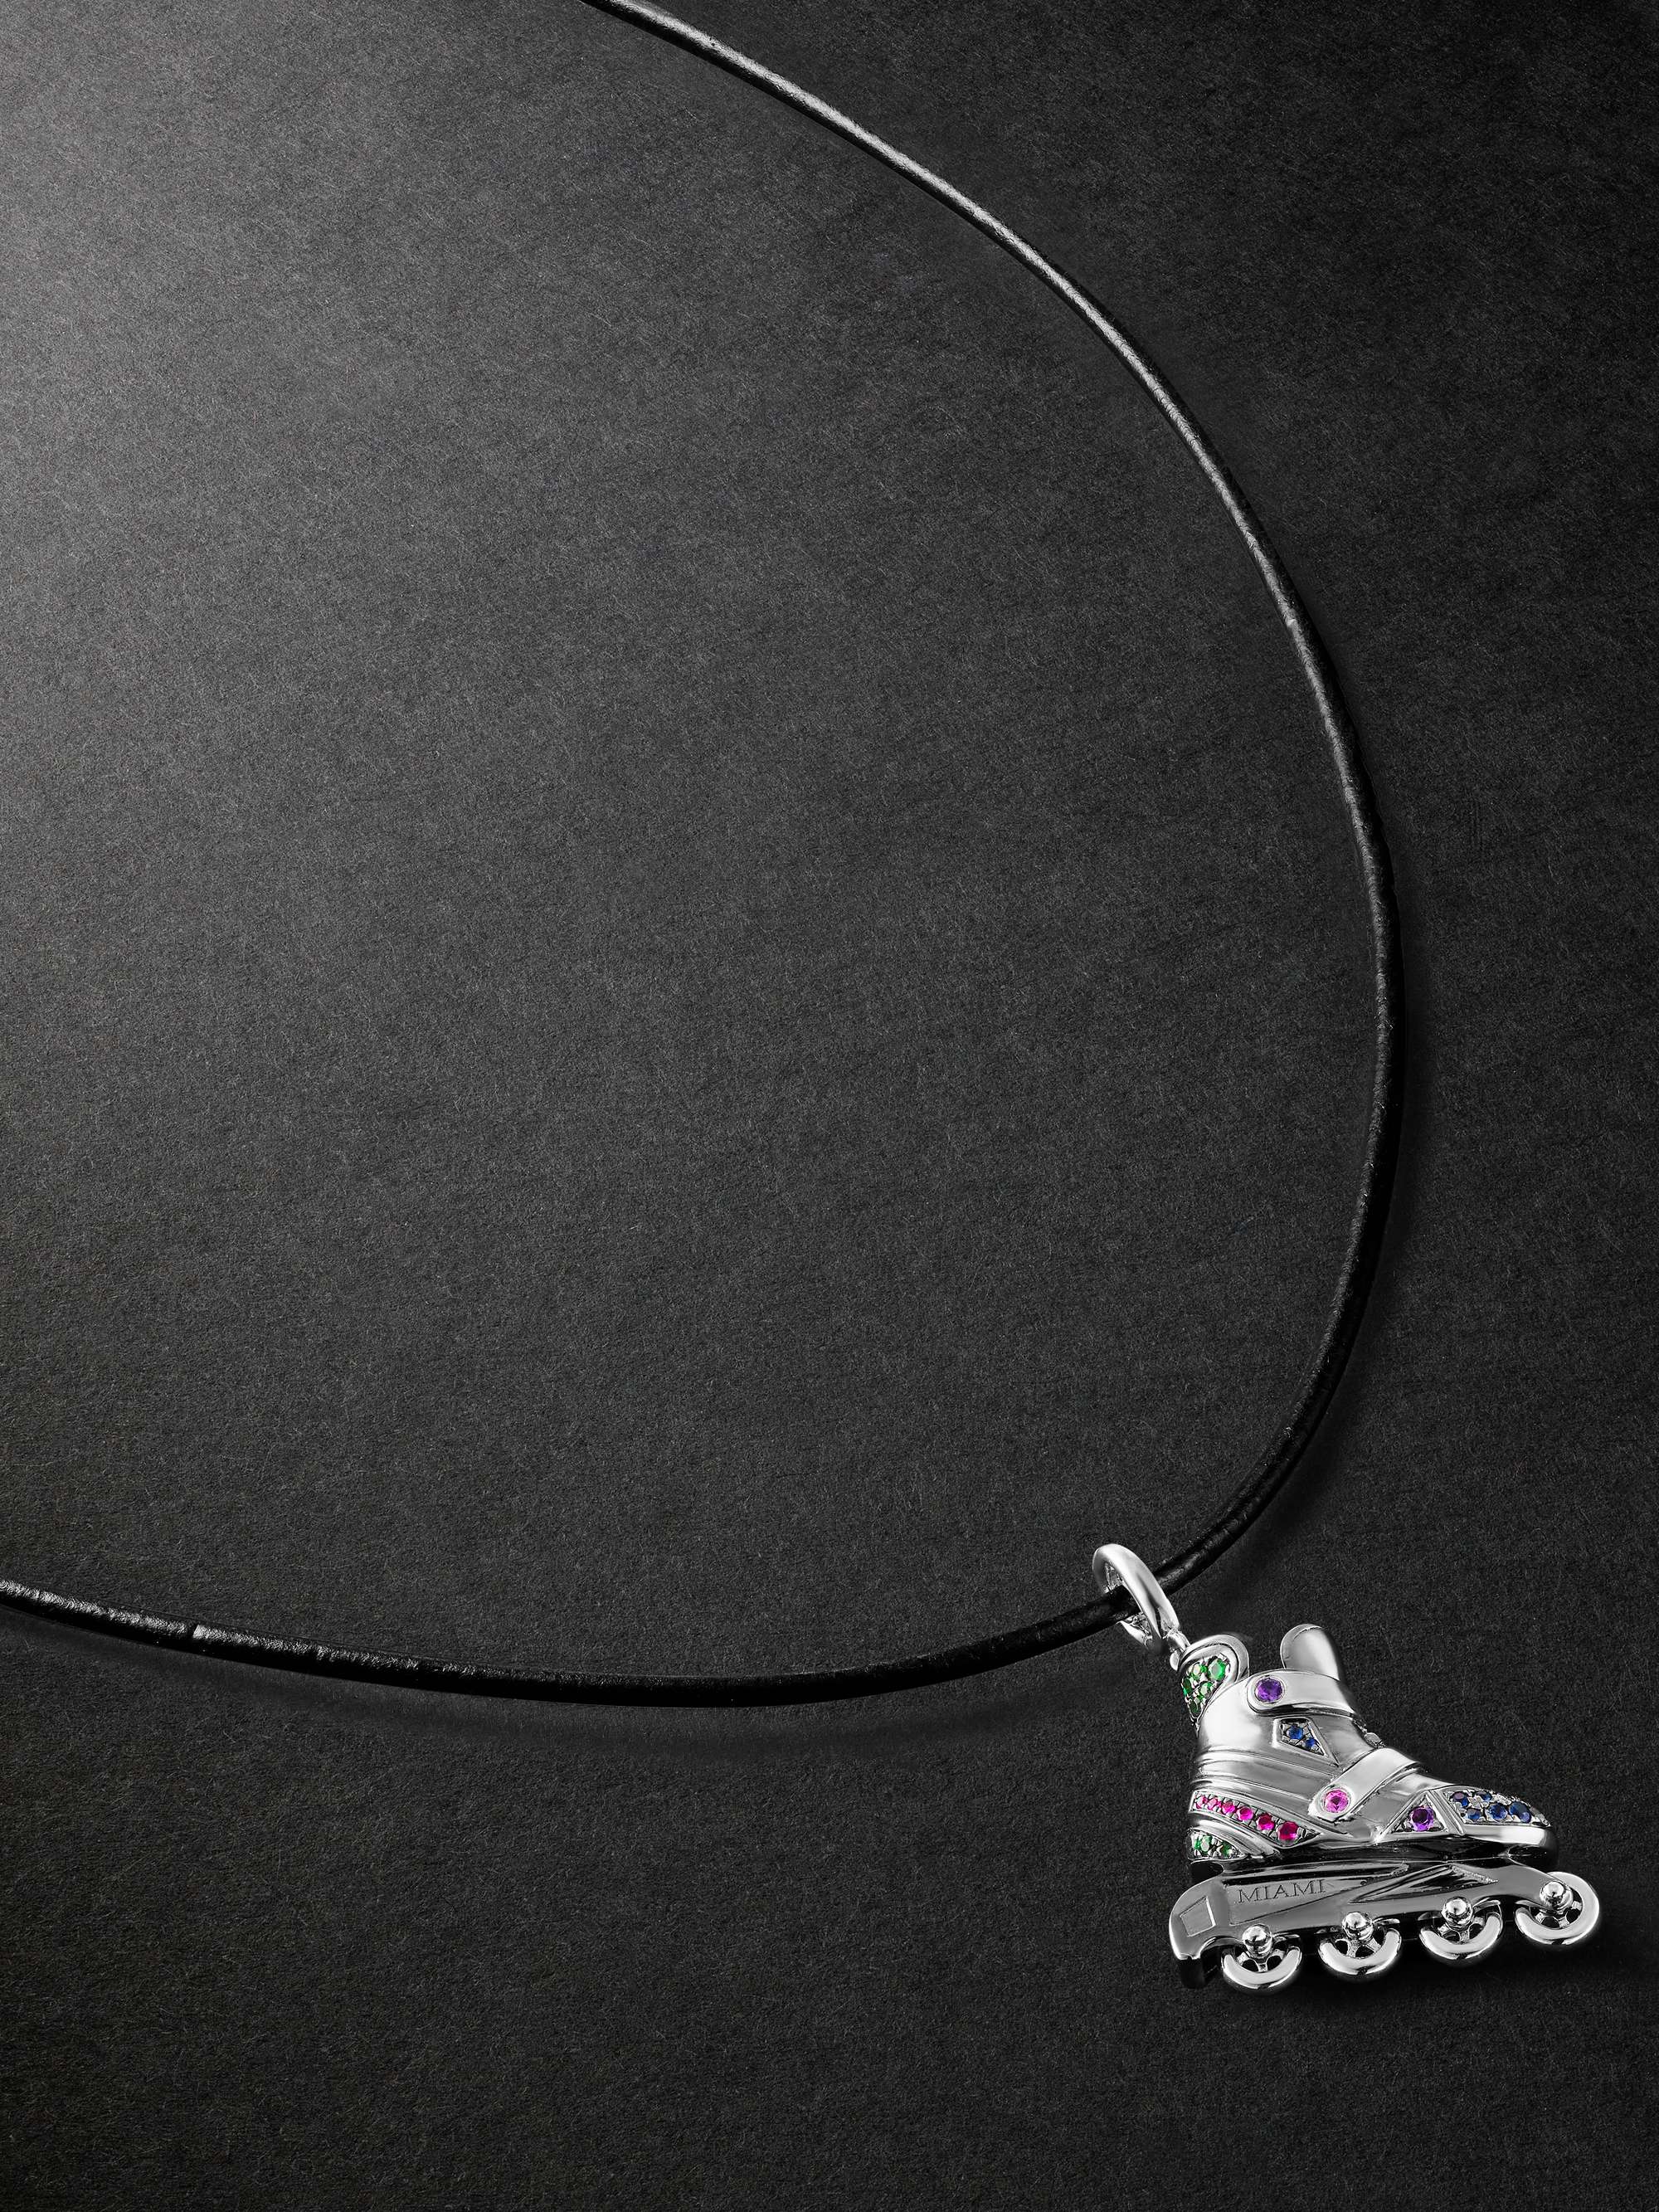 ANNOUSHKA Miami Rollerskate 18-Karat Blackened and White Gold, Multi-Stone and Leather Pendant Necklace